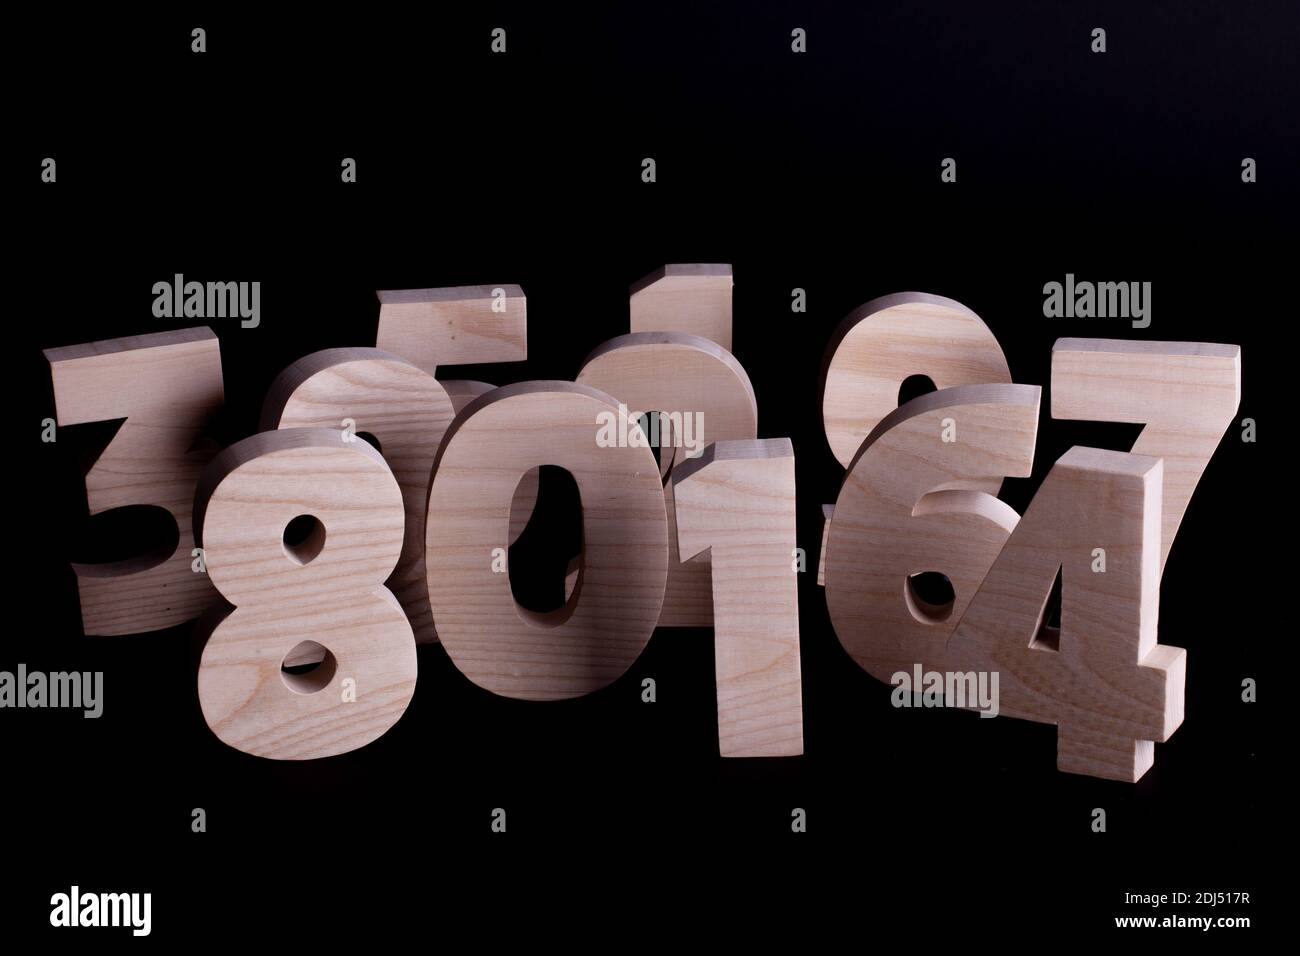 Large random wooden numbers standing up overlapping. Hardwood characters on a black background with copy space Stock Photo